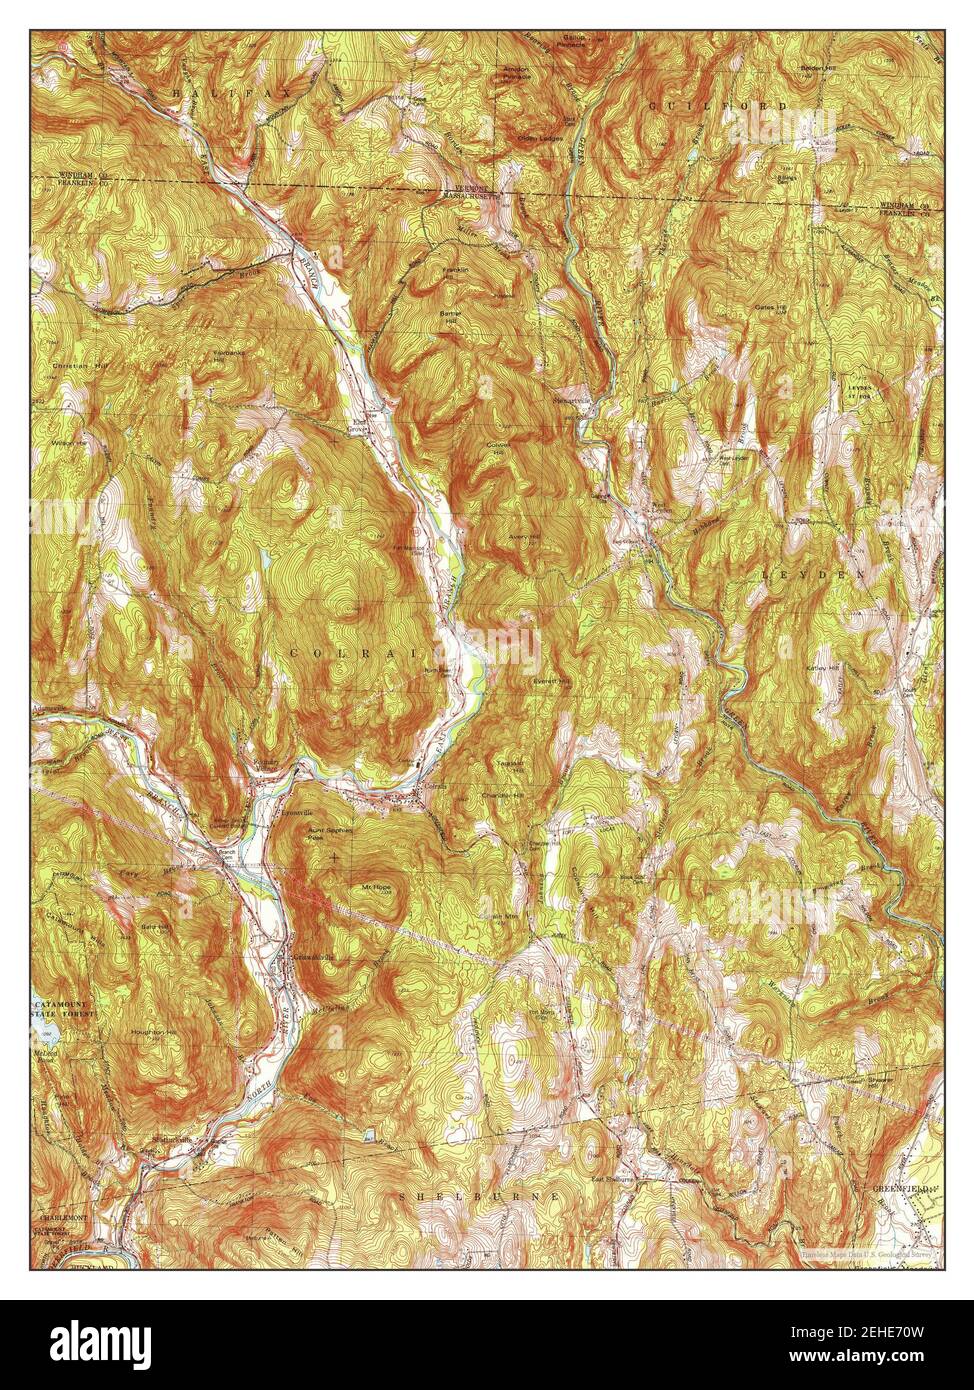 Colrain, Massachusetts, map 1977, 1:25000, United States of America by Timeless Maps, data U.S. Geological Survey Stock Photo